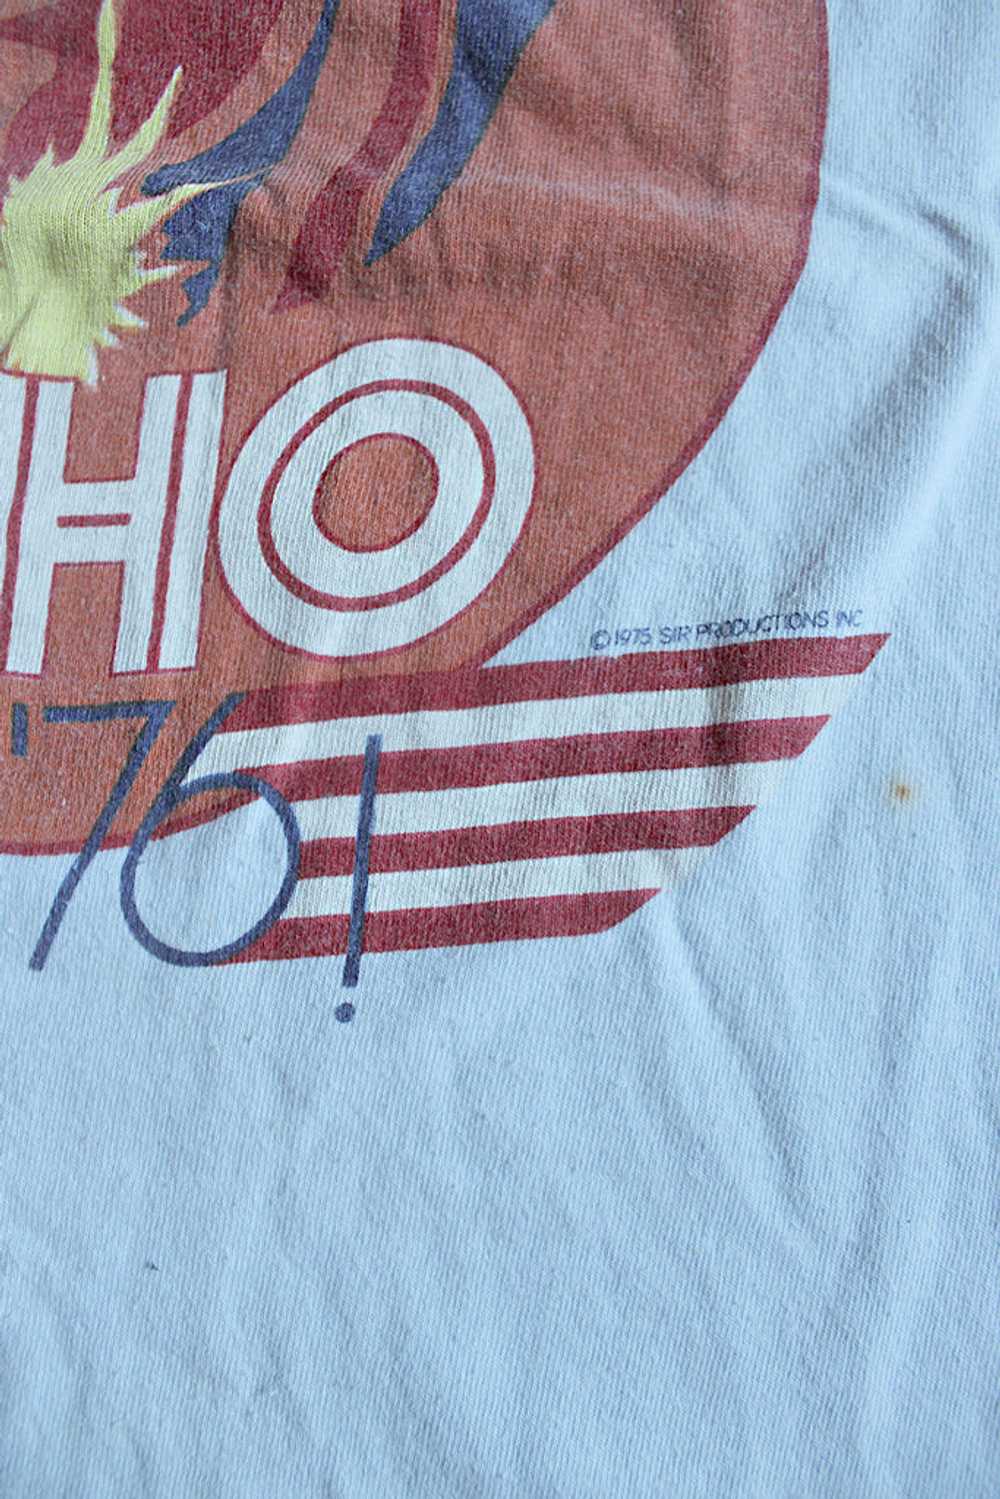 Vintage 70's The Who T-Shirt - image 2